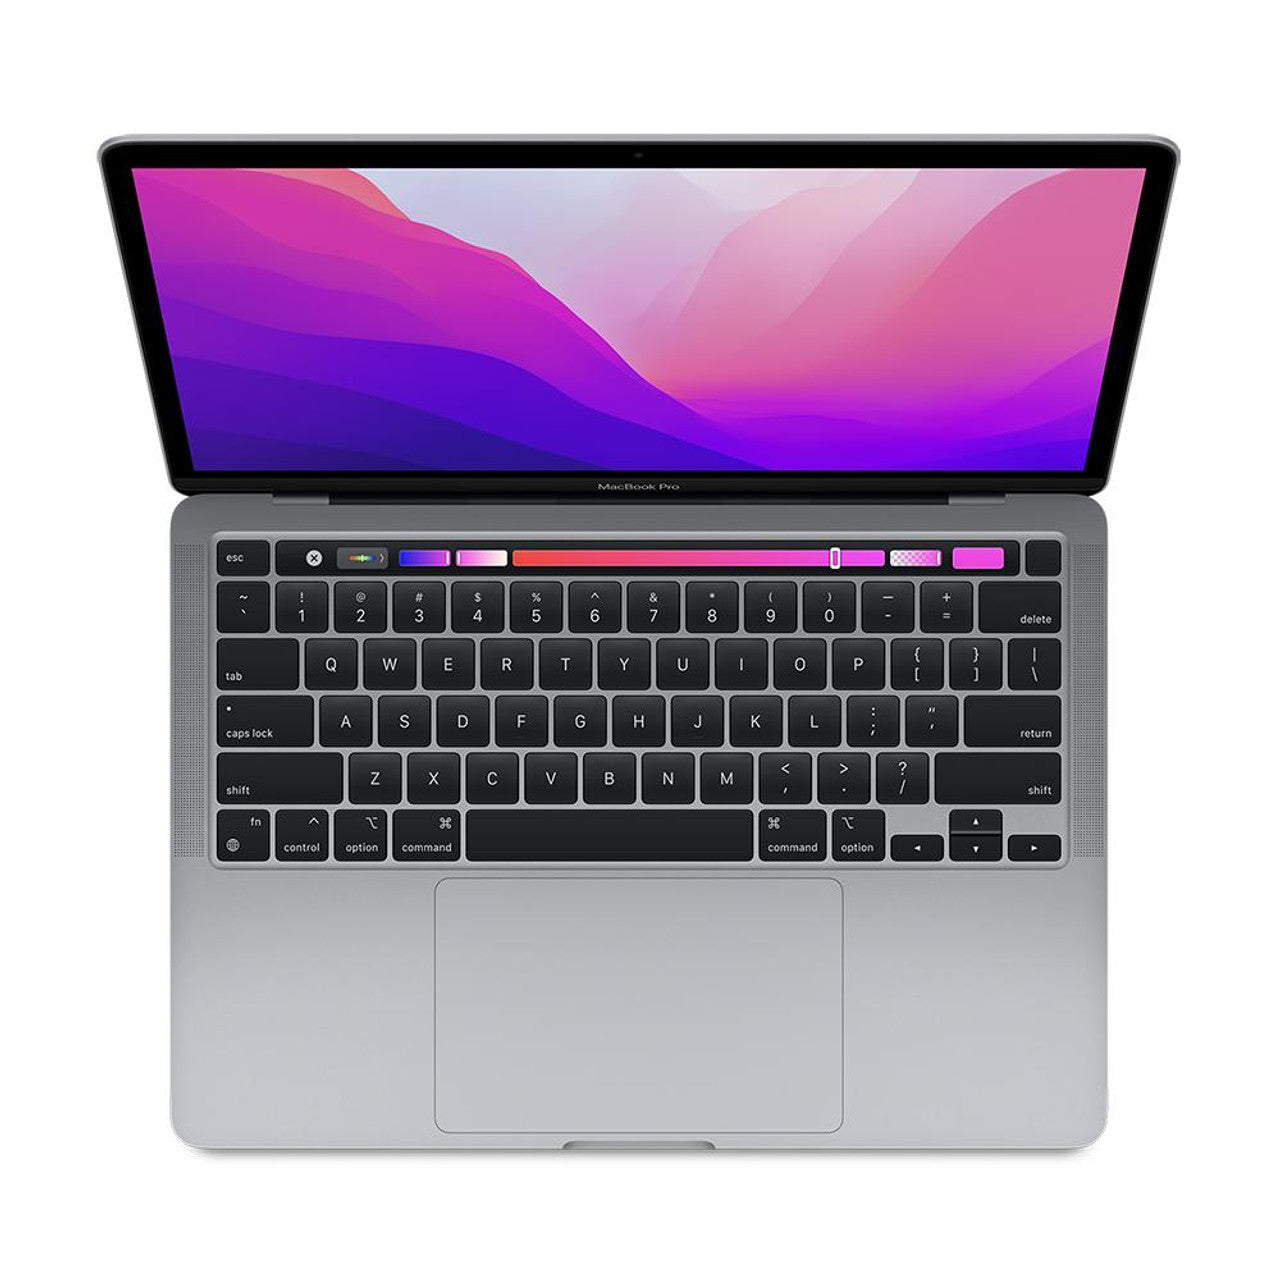 MNEH3AE/A / 13-inch MacBook Pro: Apple M2 chip with 8-core CPU and 10-core GPU, 256GB SSD - Space Gr 256 GB / Space grey / M2 Chip